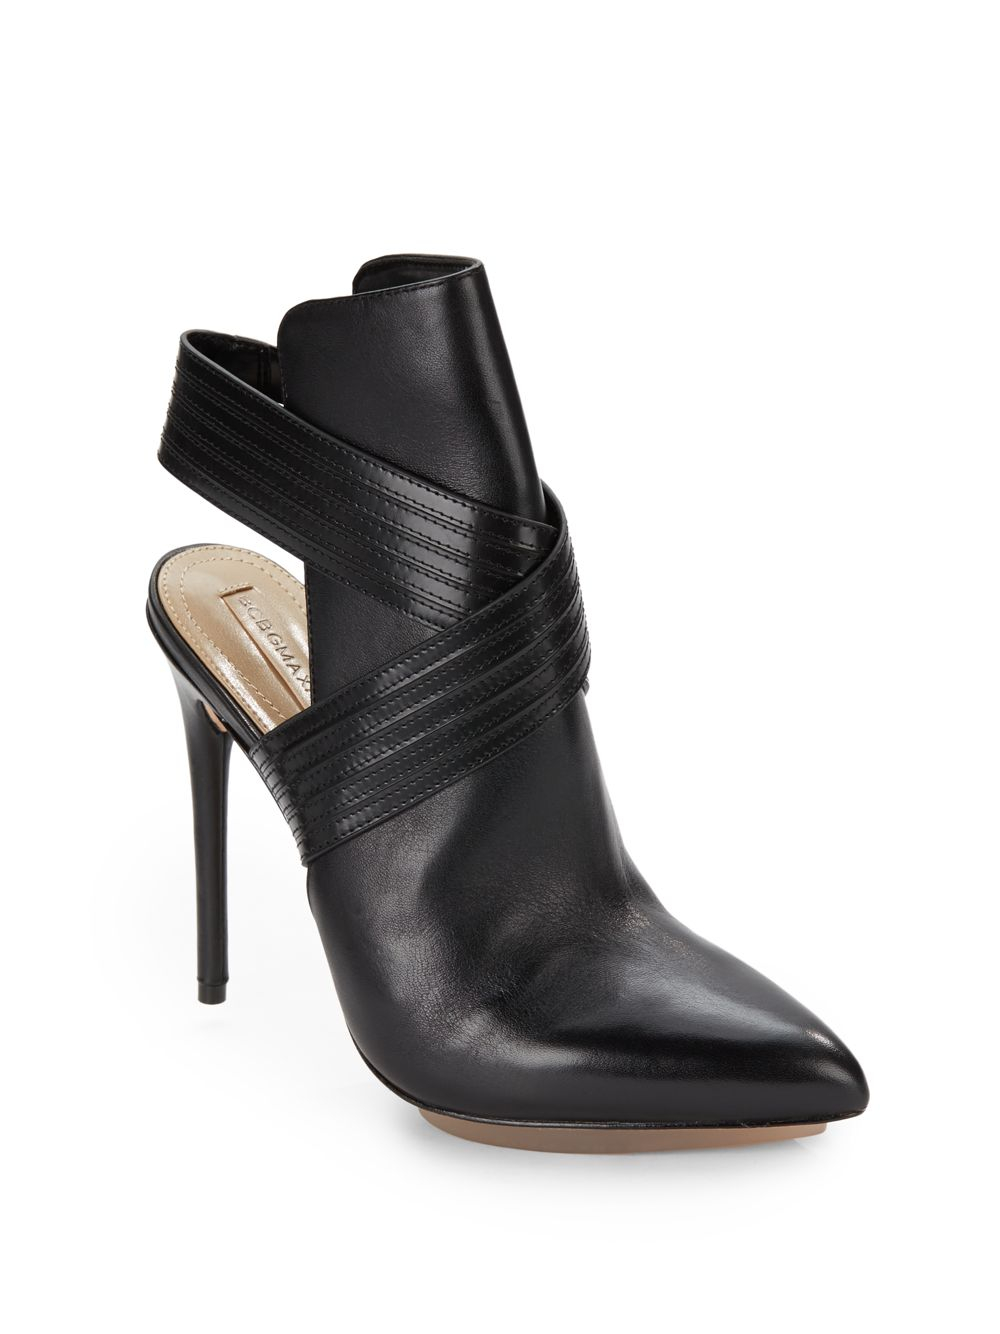 BCBGMAXAZRIA Krimp Open Back Leather Ankle Boots in Black - Lyst